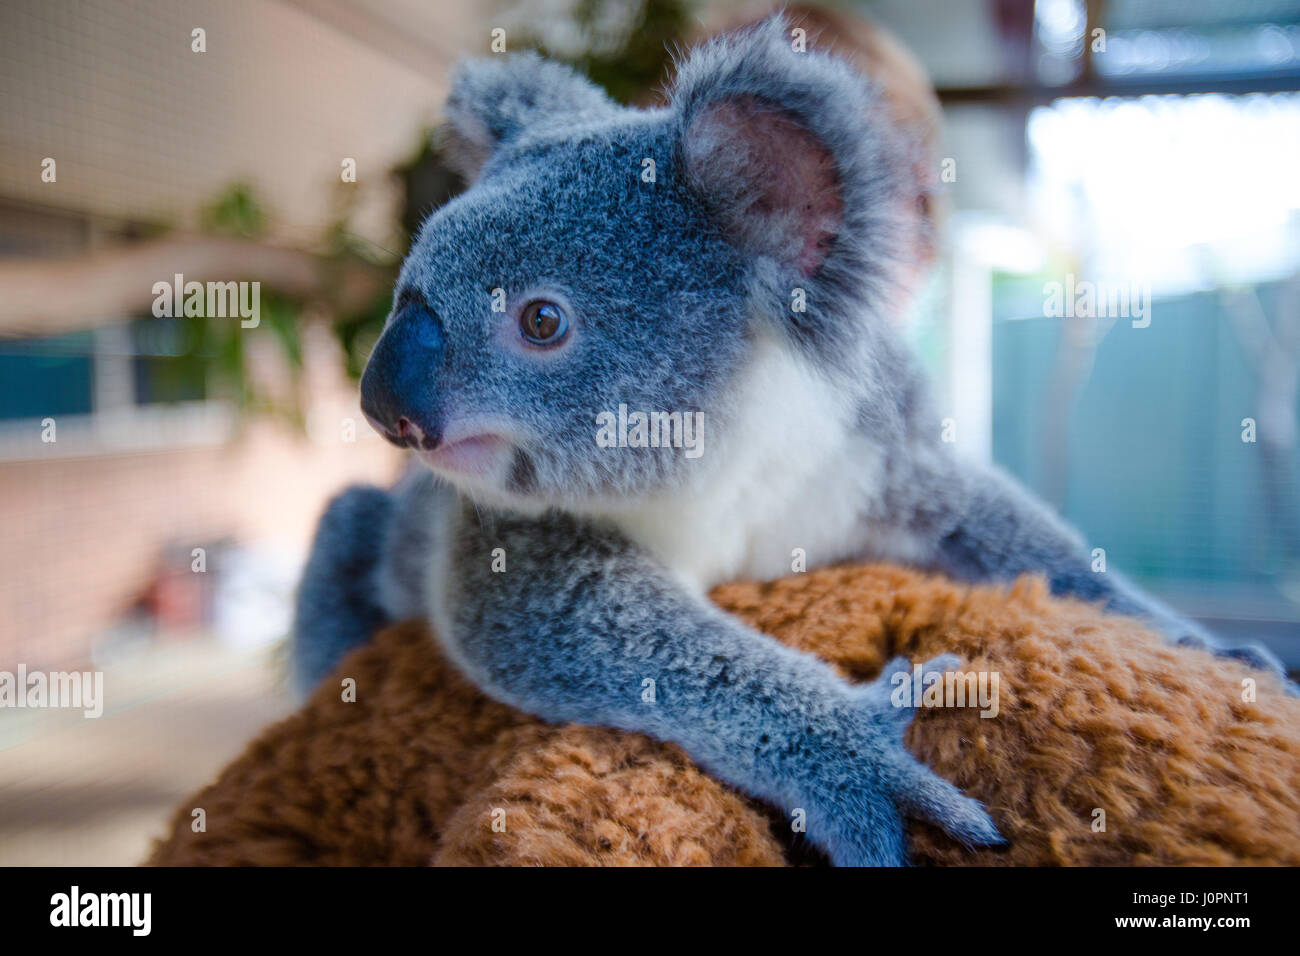 A baby koala bear who lost its parents living in a sanctuary living its life in captivity.  Queensland, Australia. Stock Photo